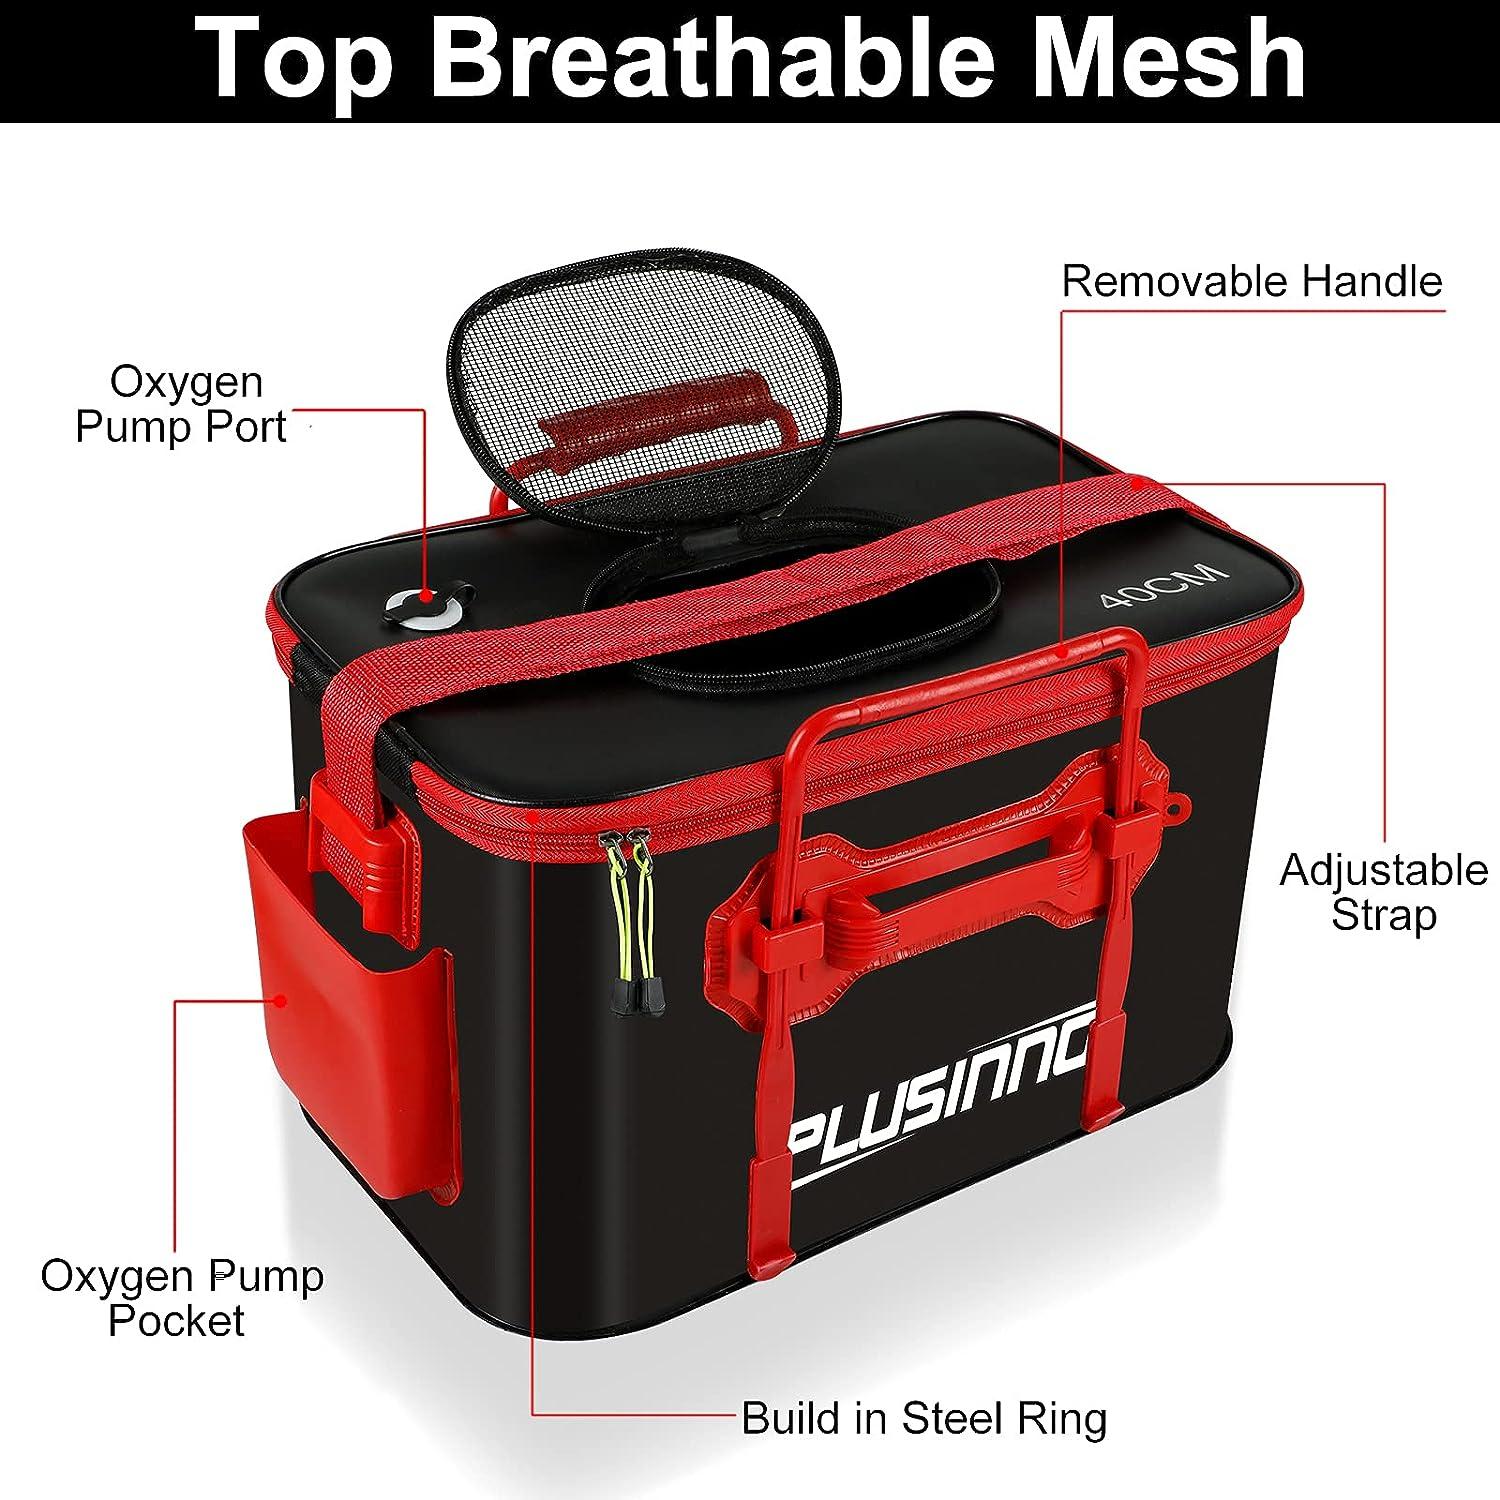 Multi-Functional Fishing Bag - Live Fish Container Fishing Bags